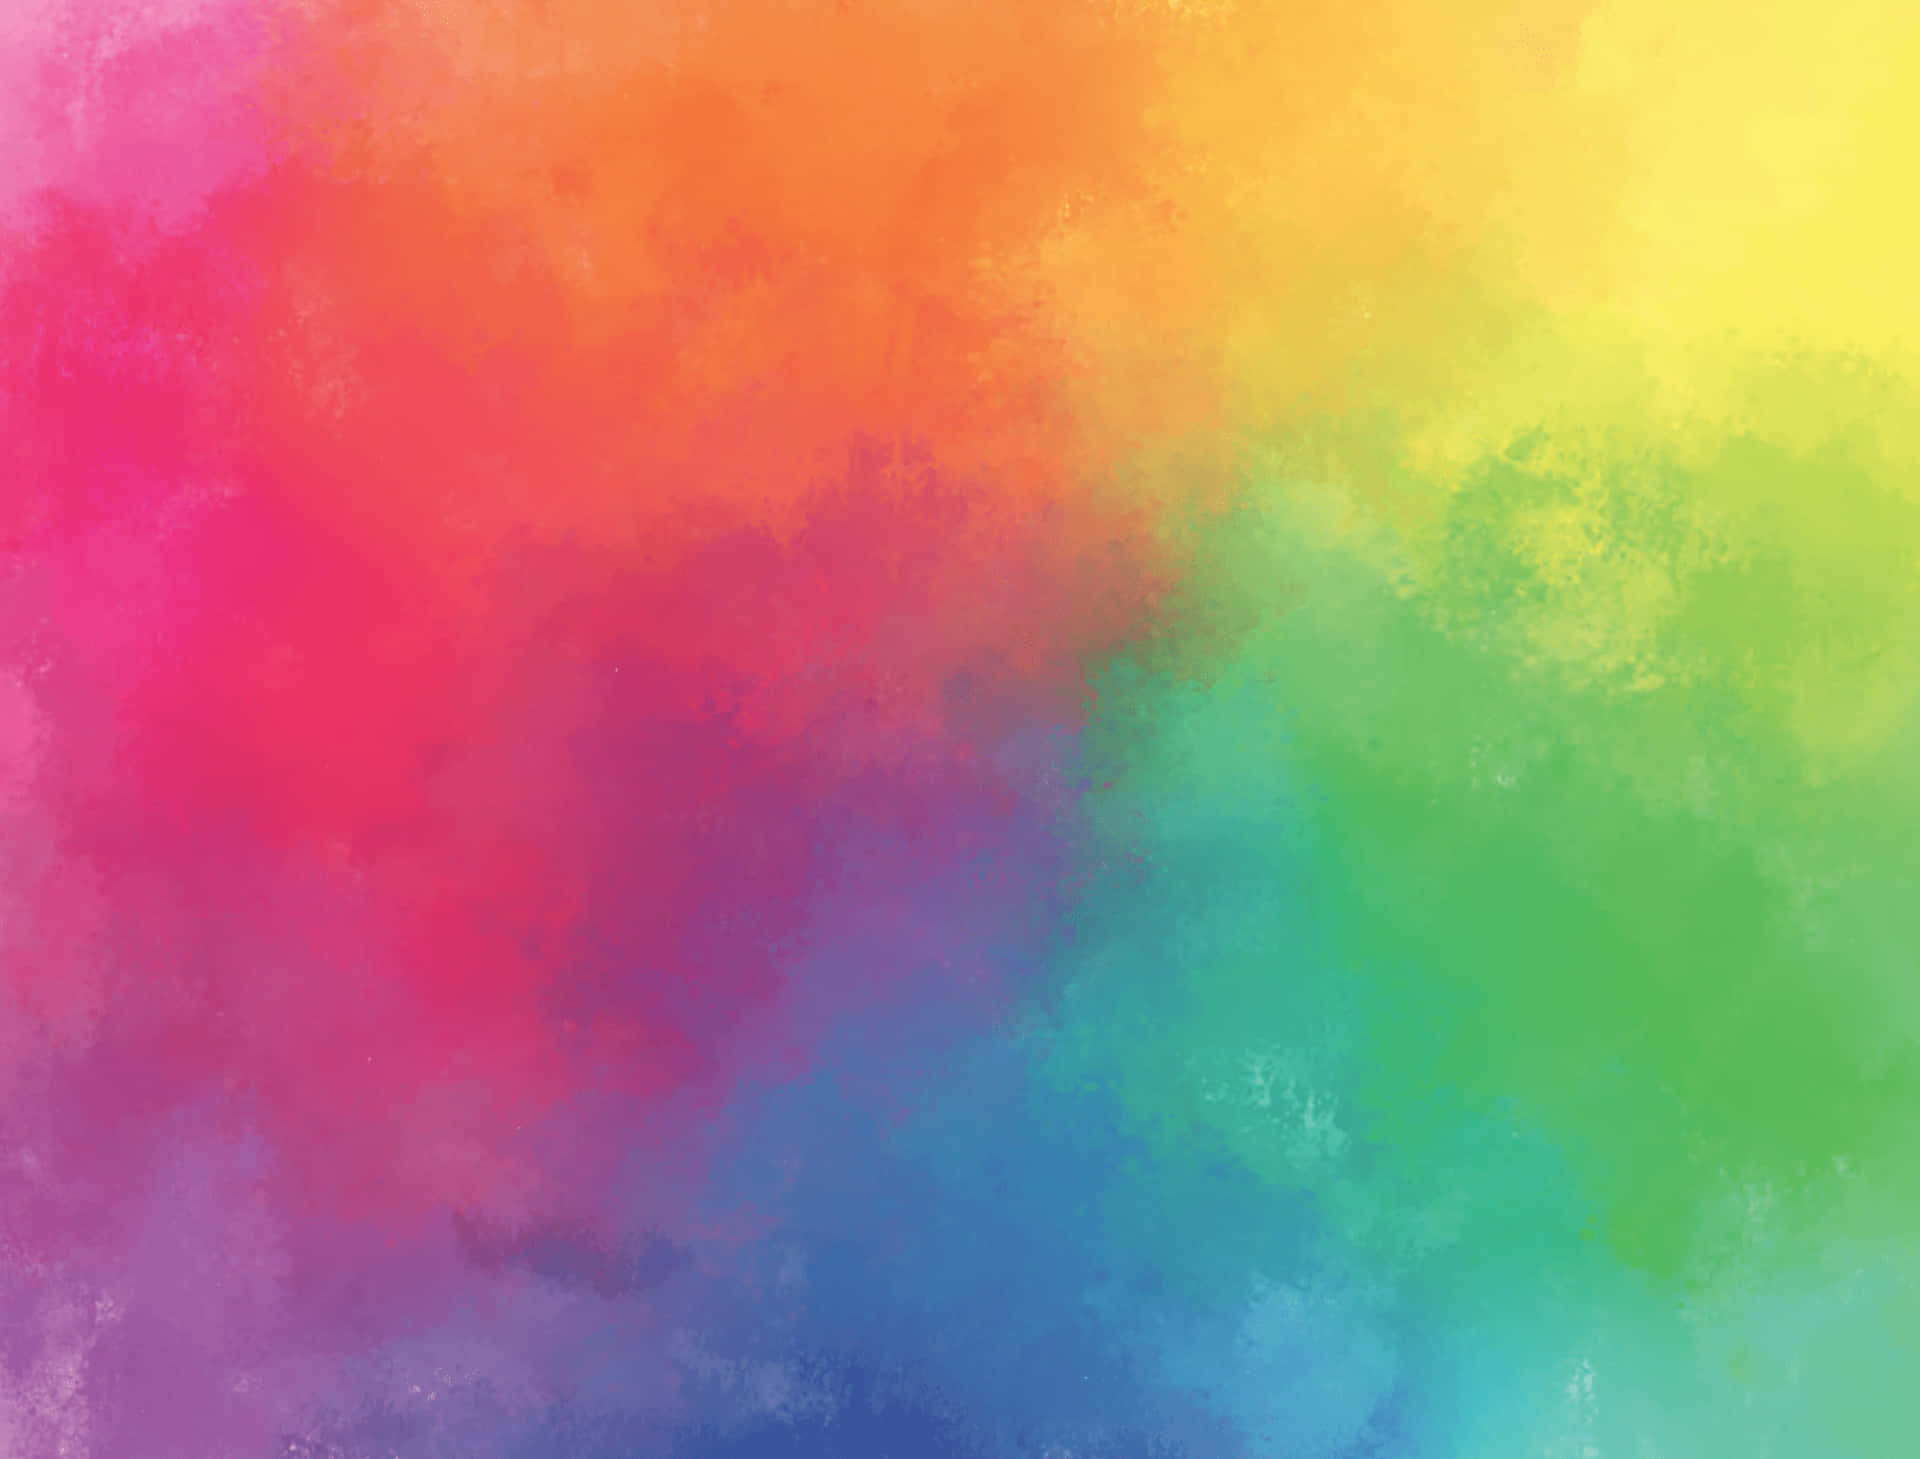 A burst of colors emerges in this vibrant Rainbow Gradient.